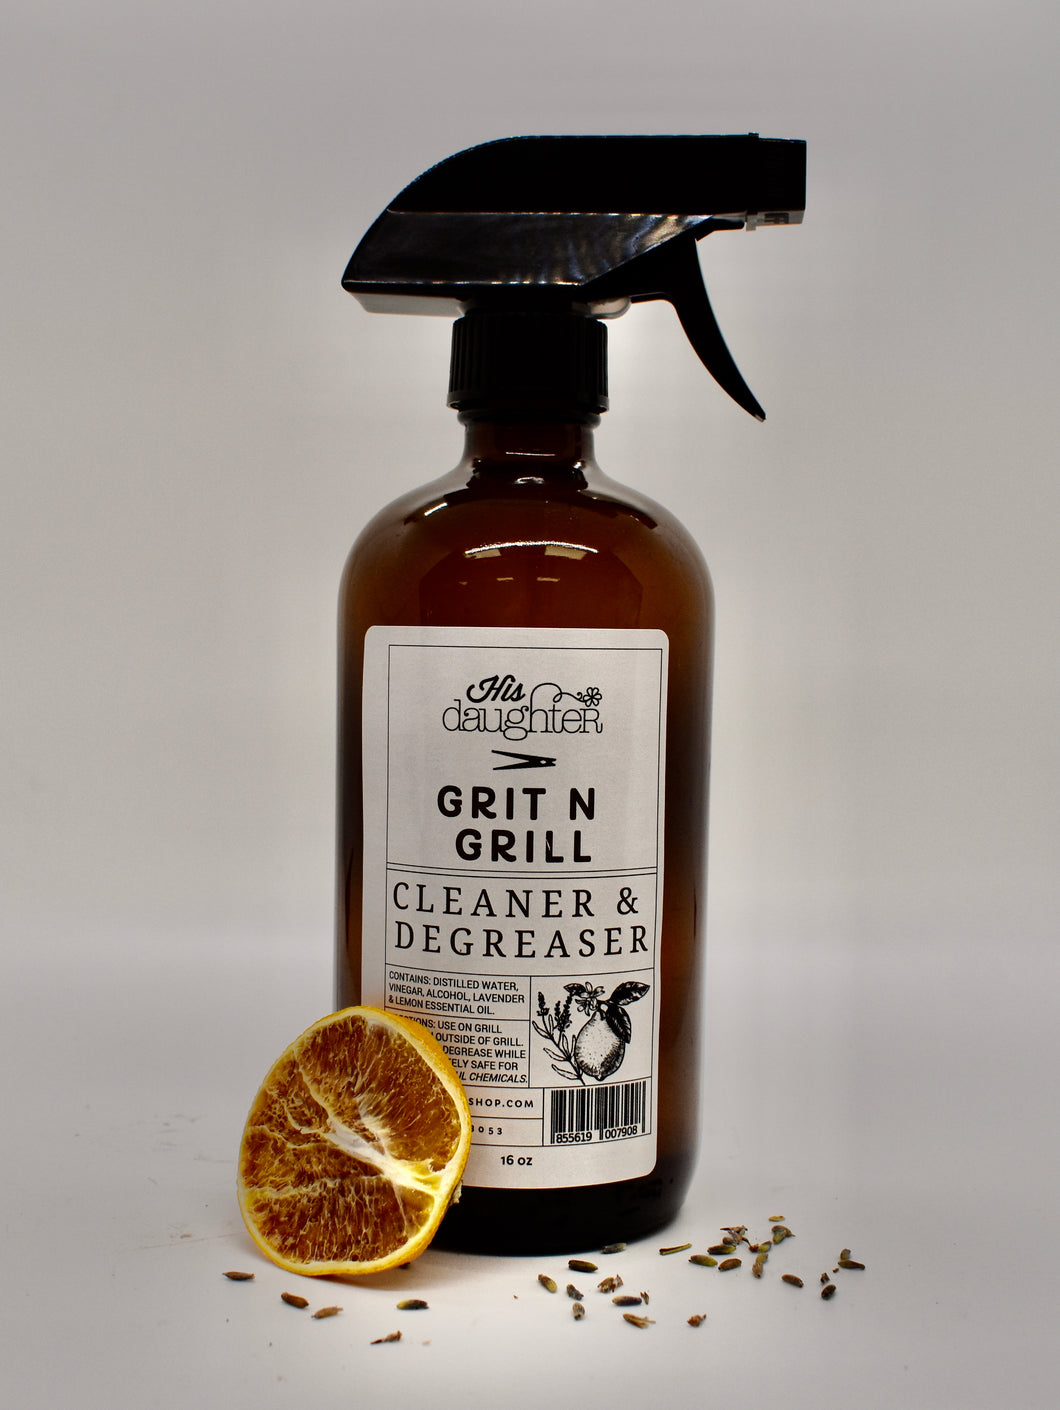 Grit n' Grill Cleaner & Degreaser